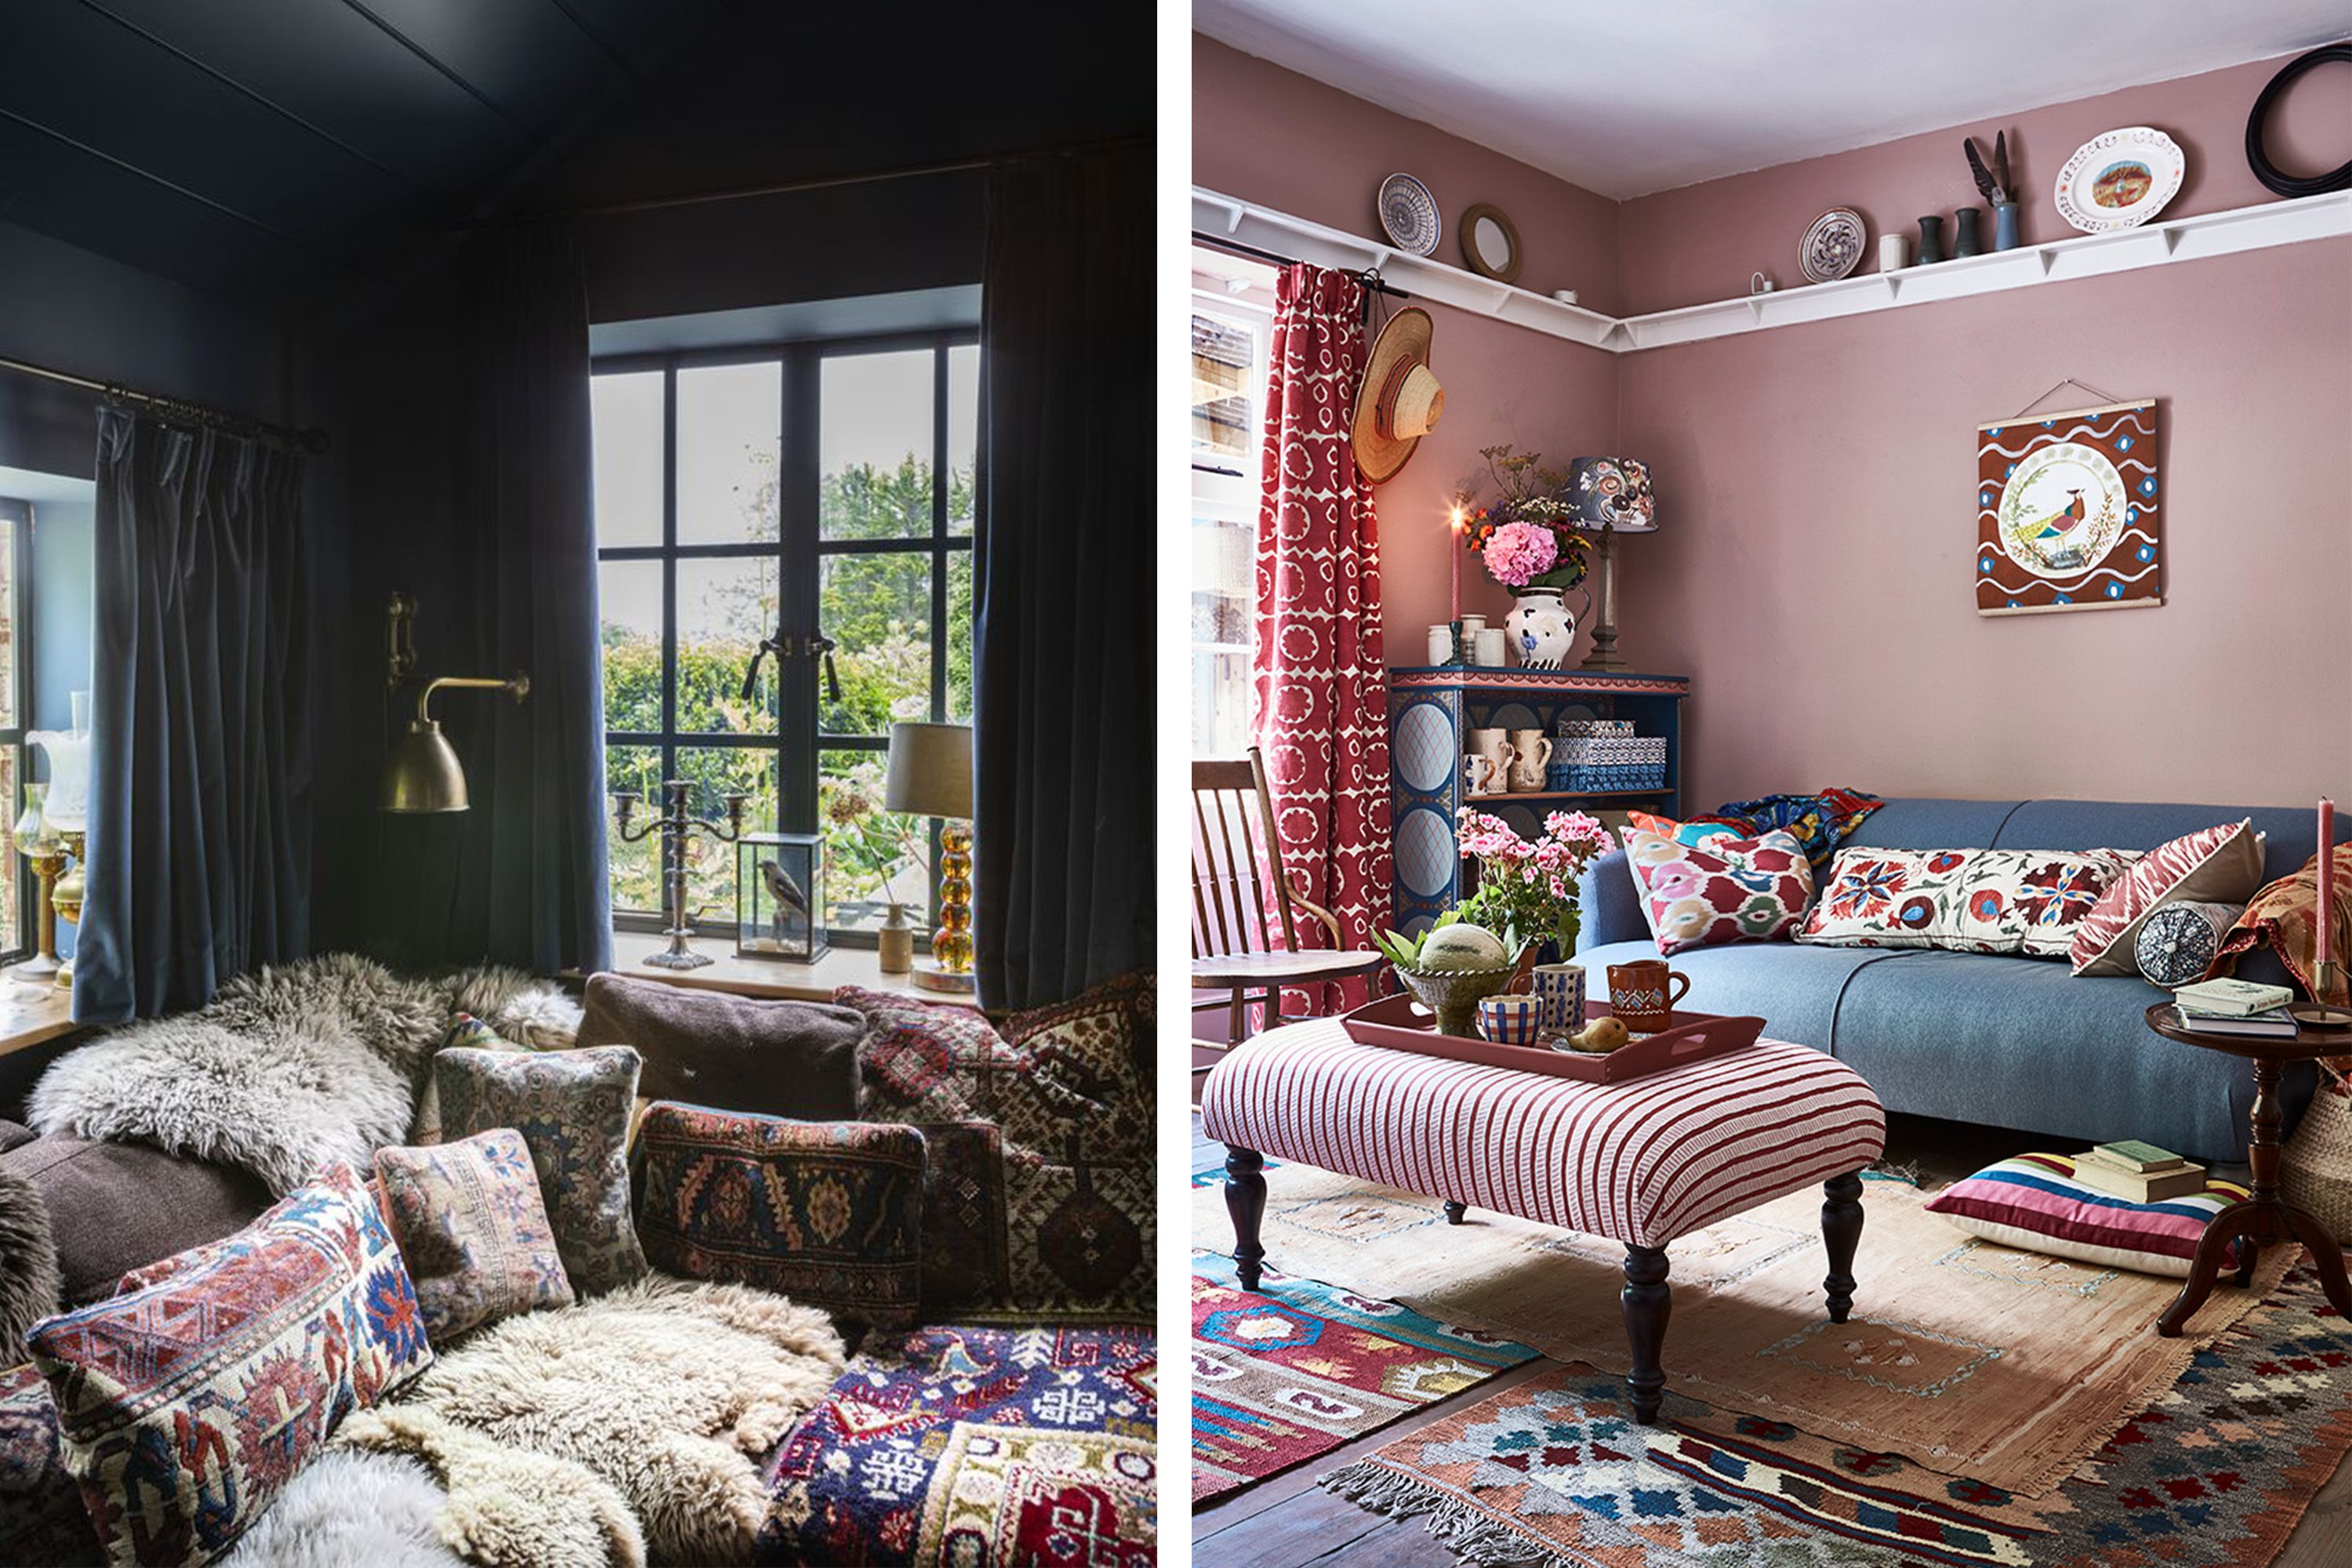 7 Tips on How to Decorate with Vintage Home Decor